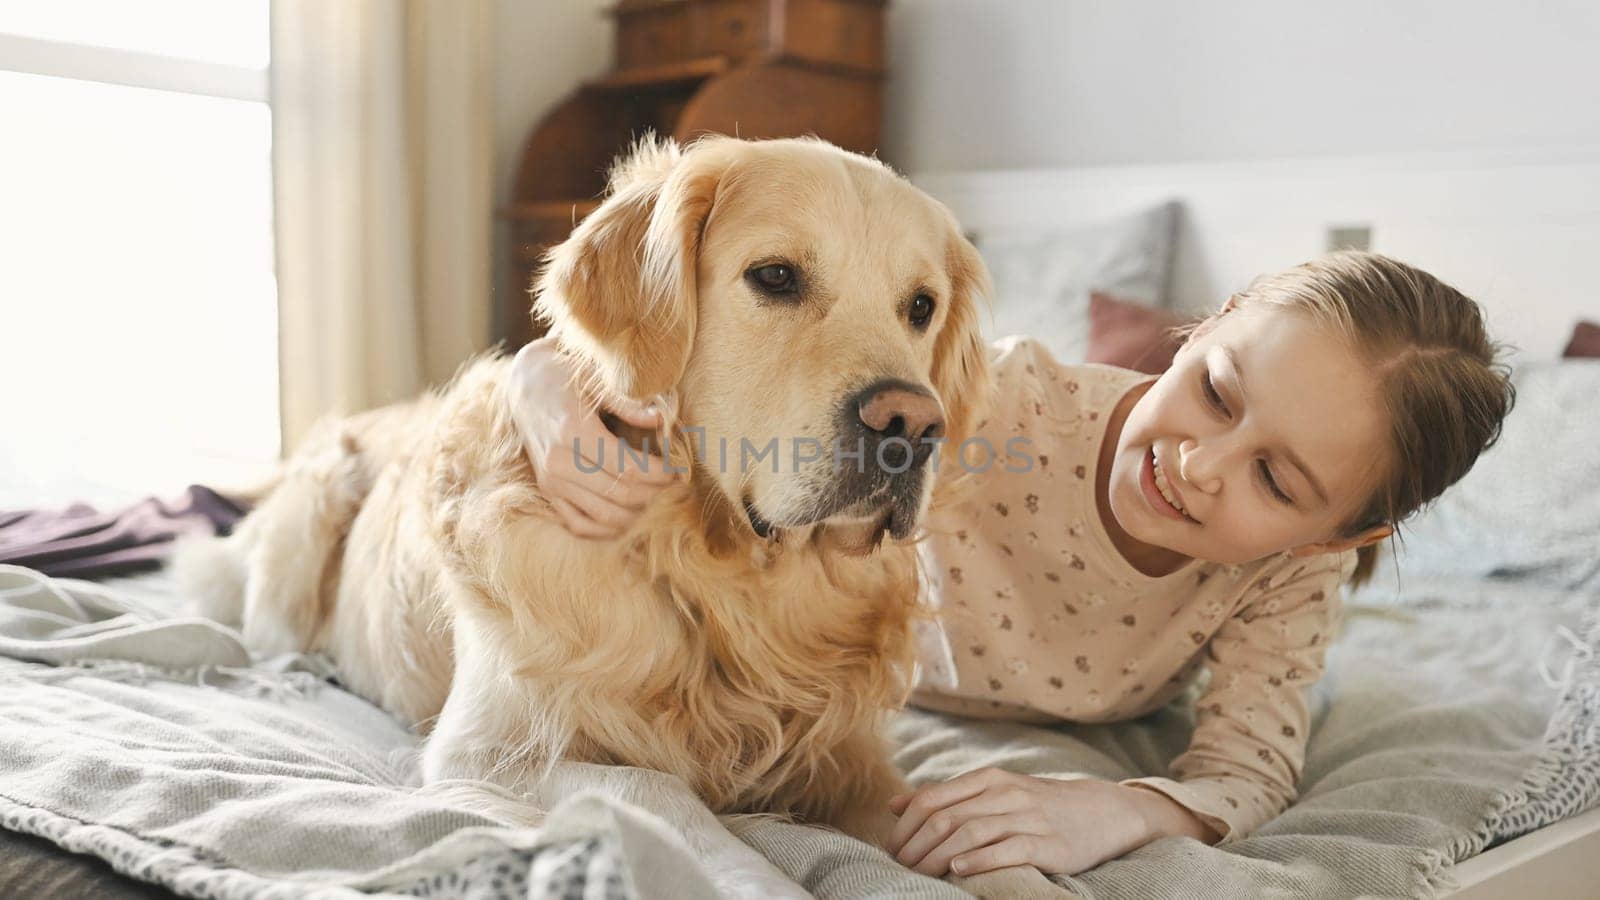 Pretty girl with golden retriever dog in bed by GekaSkr